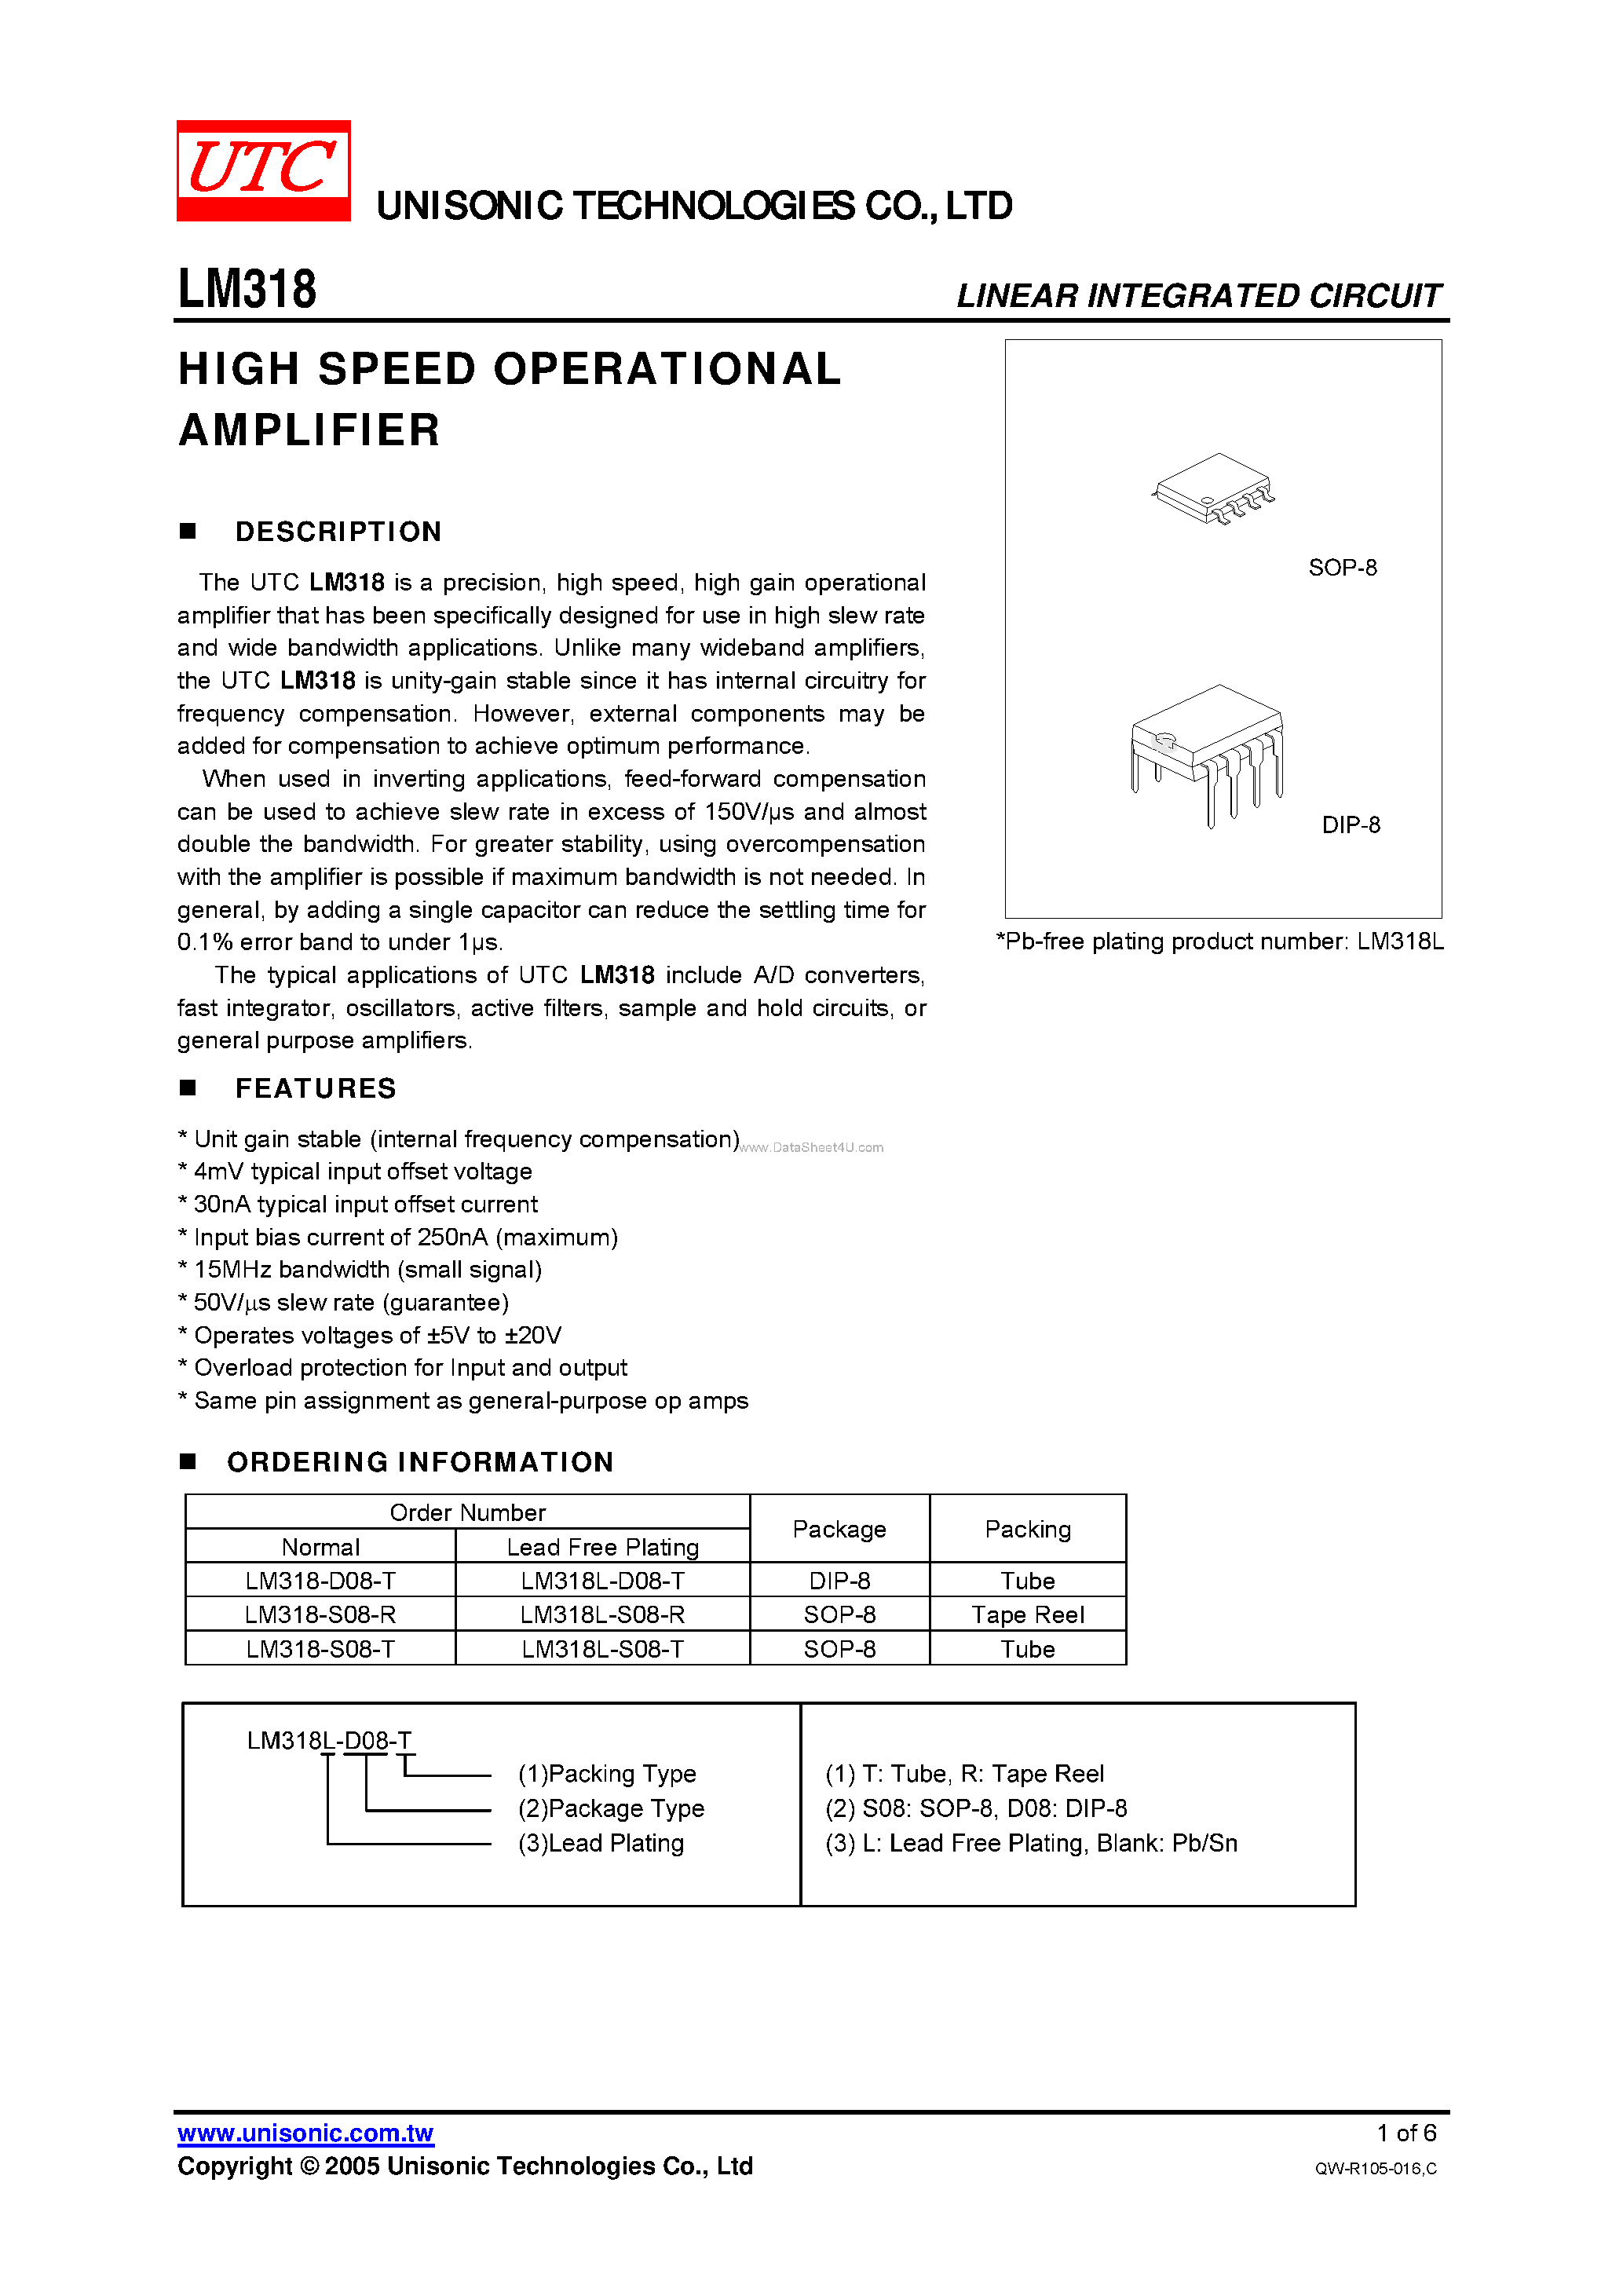 Datasheet LM318 - HIGH SPEED OPERATIONAL AMPLIFIER page 1